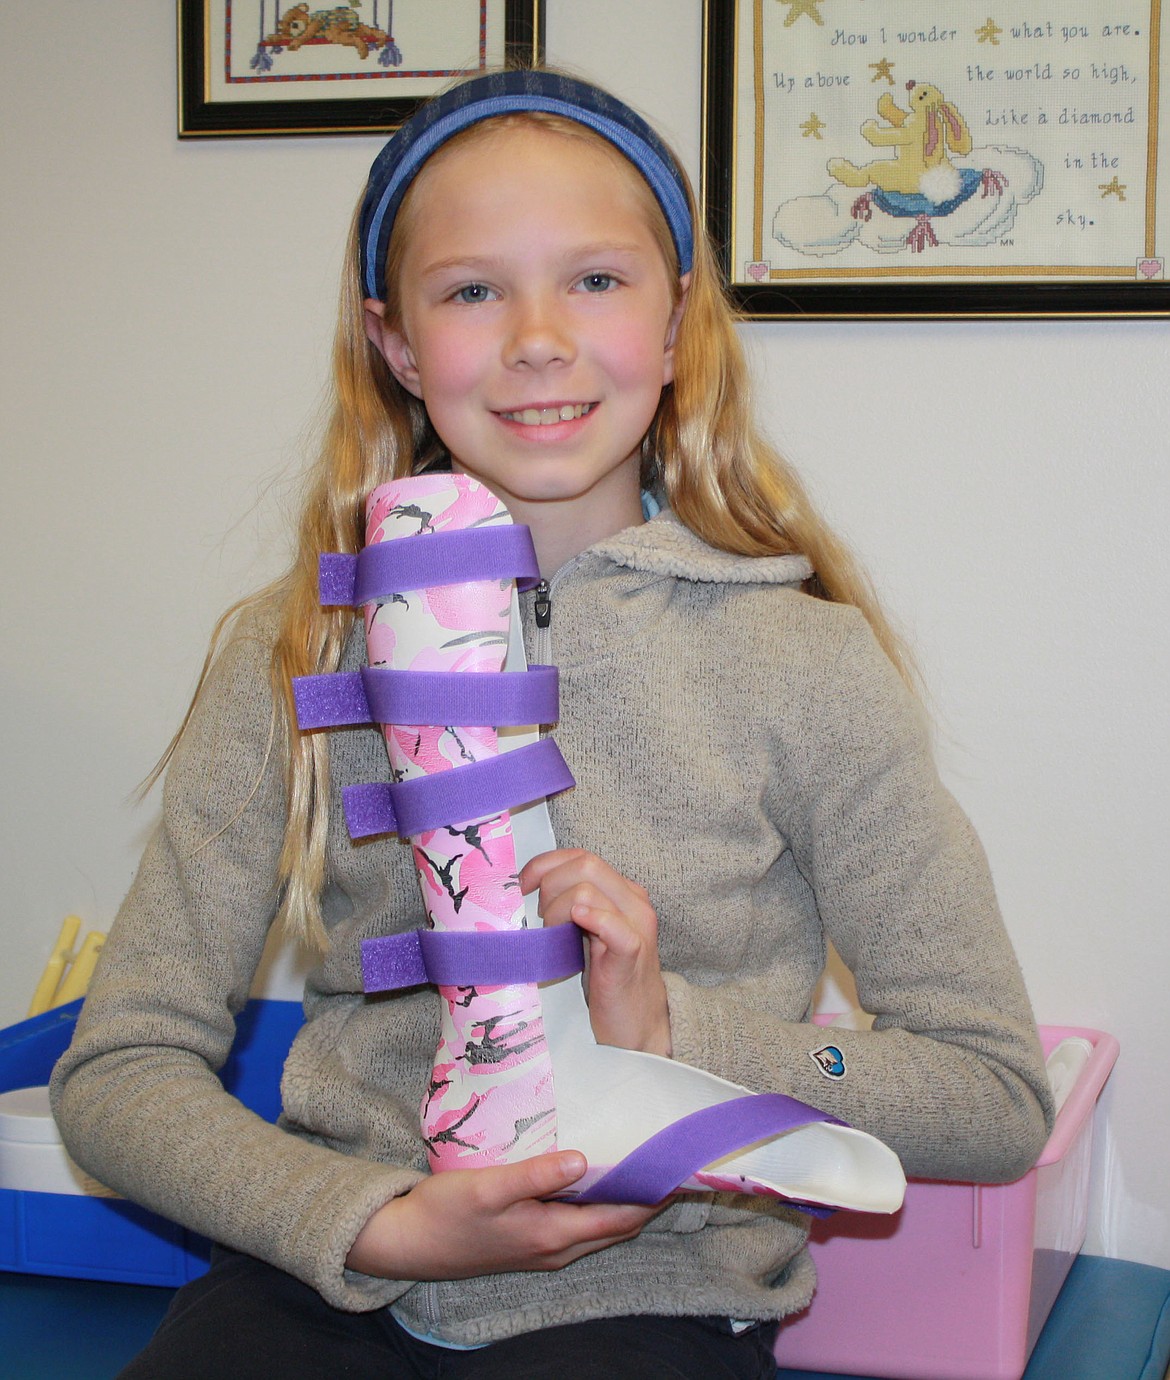 Emmaline Spyra, a fifth-grader at Sorensen Magnet School of the Arts and Humanities, showcases a clubfoot splint Thursday morning while on a tour of the physical therapy area of the Shriners Children's Hospital in Spokane. The kind-hearted young lady held two bake sales to raise $373 to donate to the hospital, which is one of the only local hospitals that has pediatric orthopedic surgeons who can correct clubfeet. (Courtesy photo)